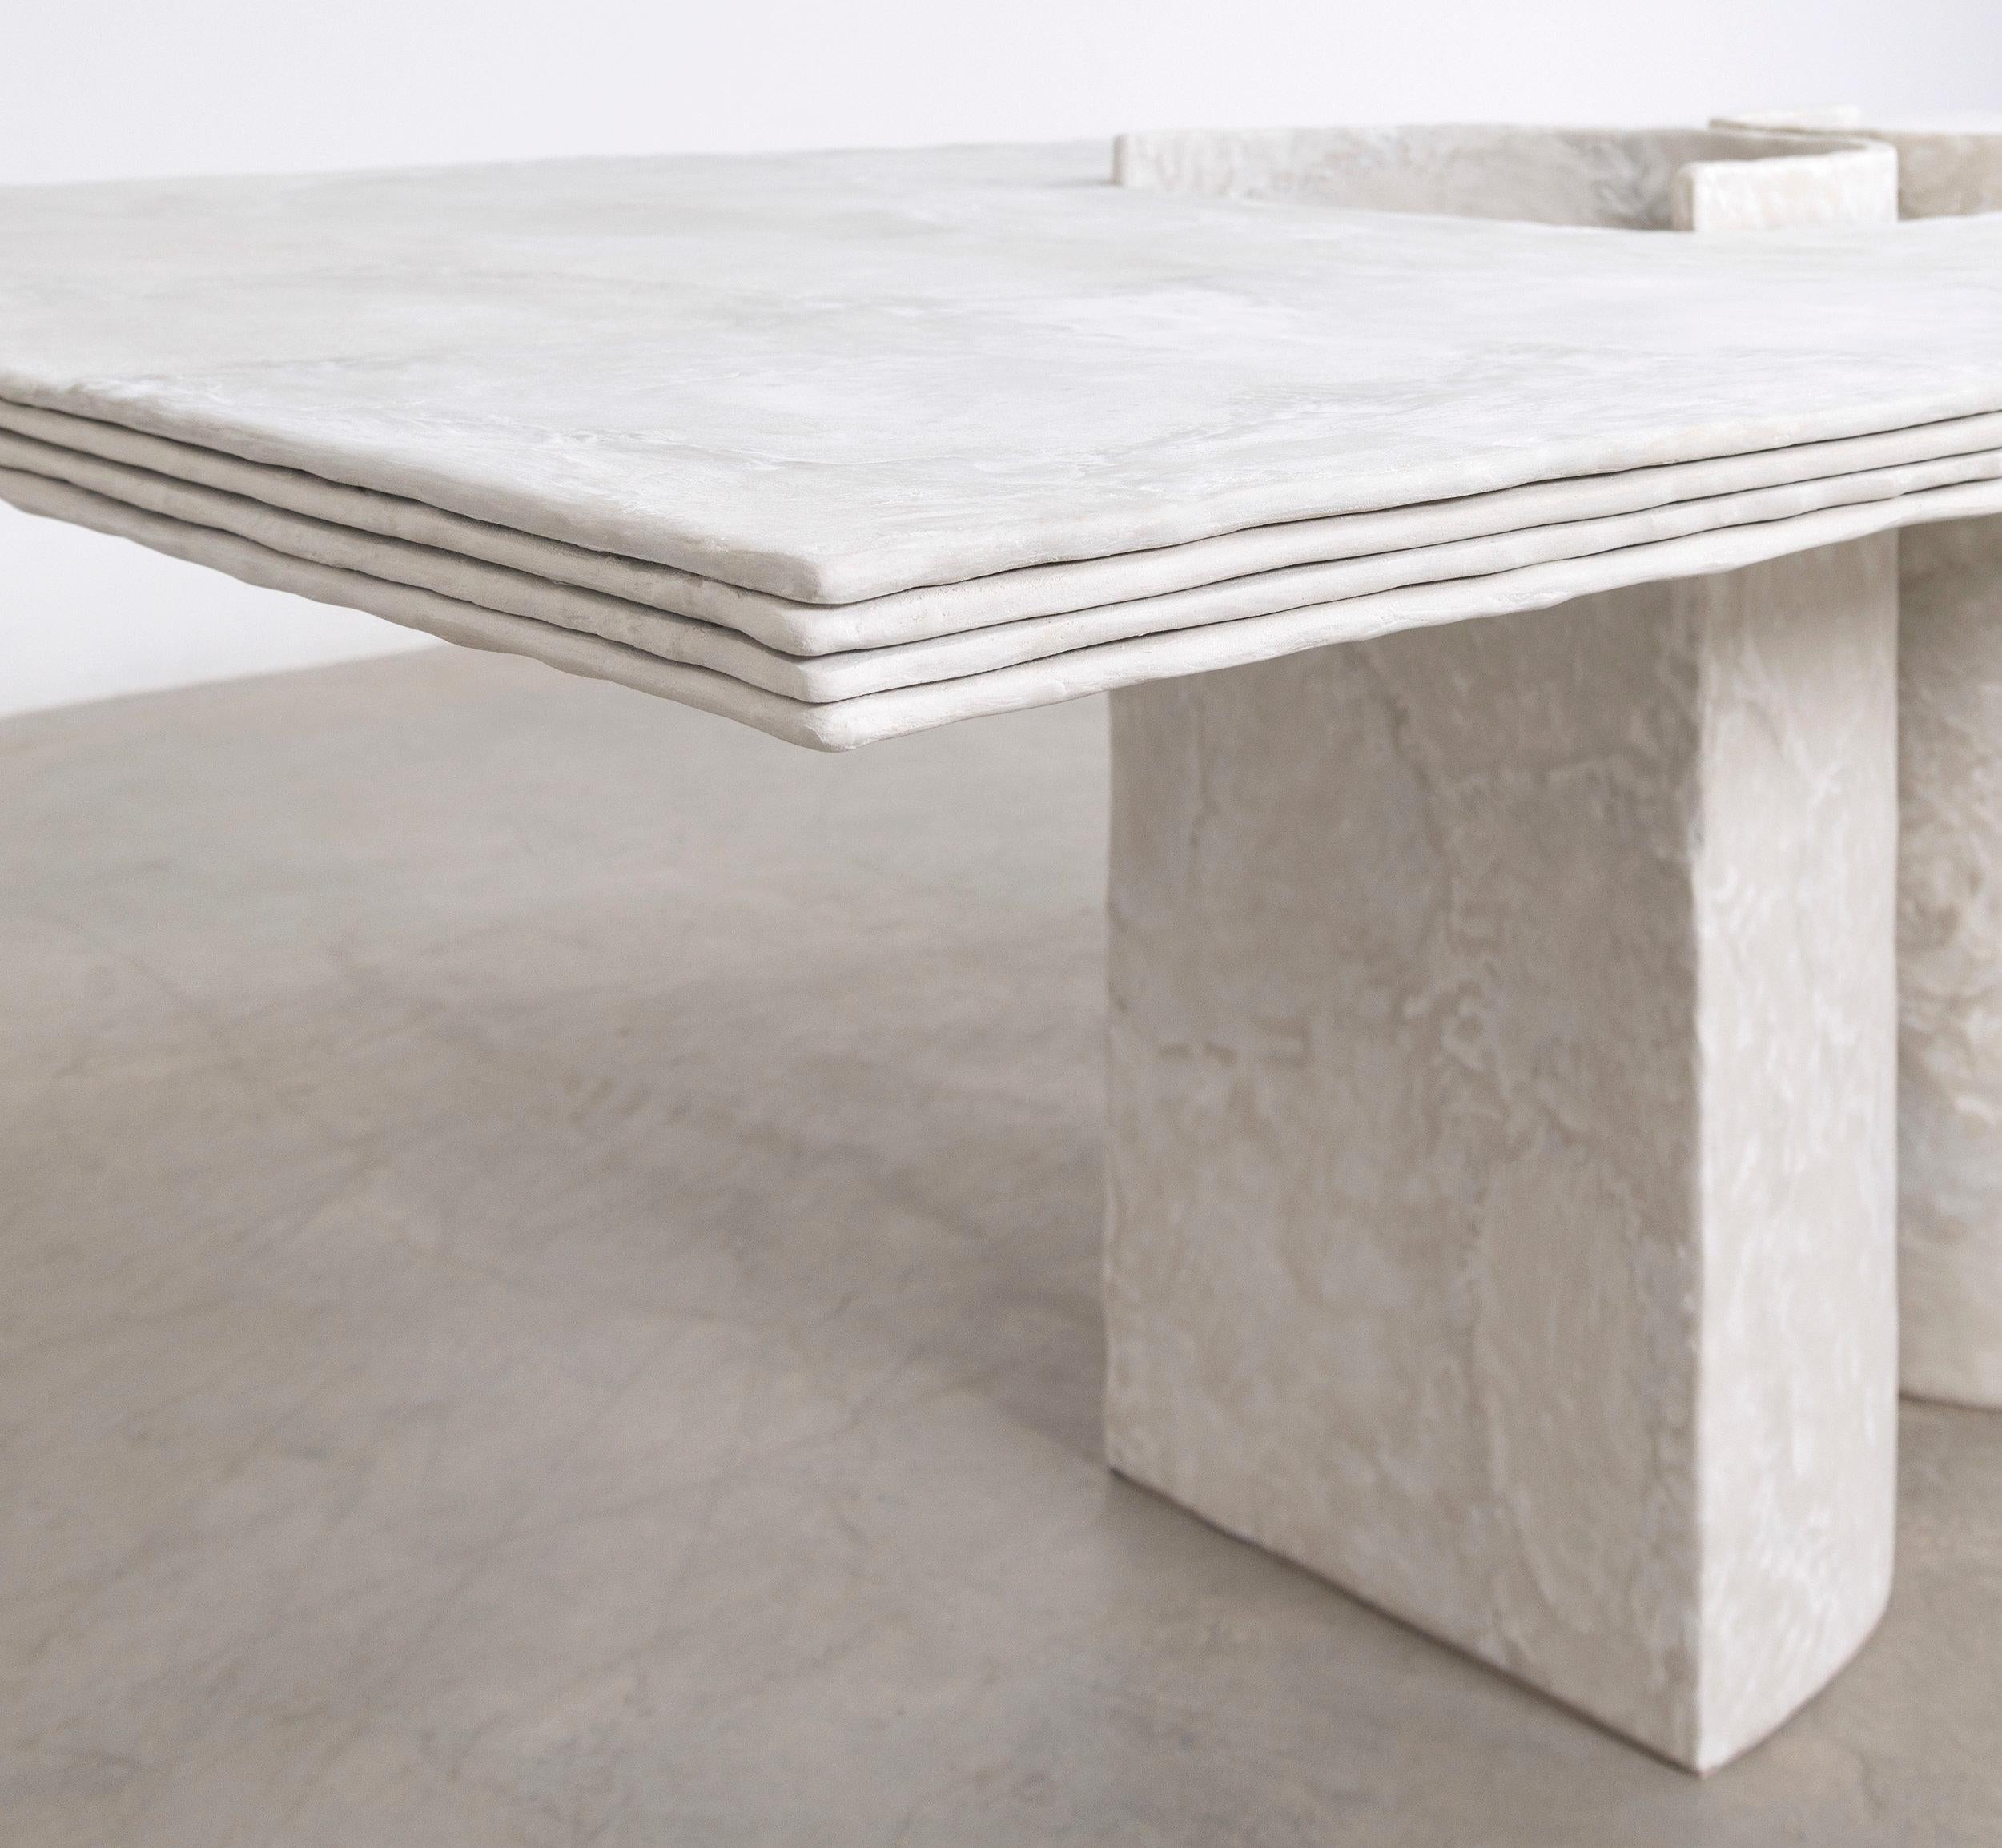 This rectangular dining table is furniture as sculpture, hand-crafted from cement by emerging artist Bailey Fontaine. Each table is unique, featuring the organic marks left by the artist during the sculpting process. It is a gorgeous minimalist